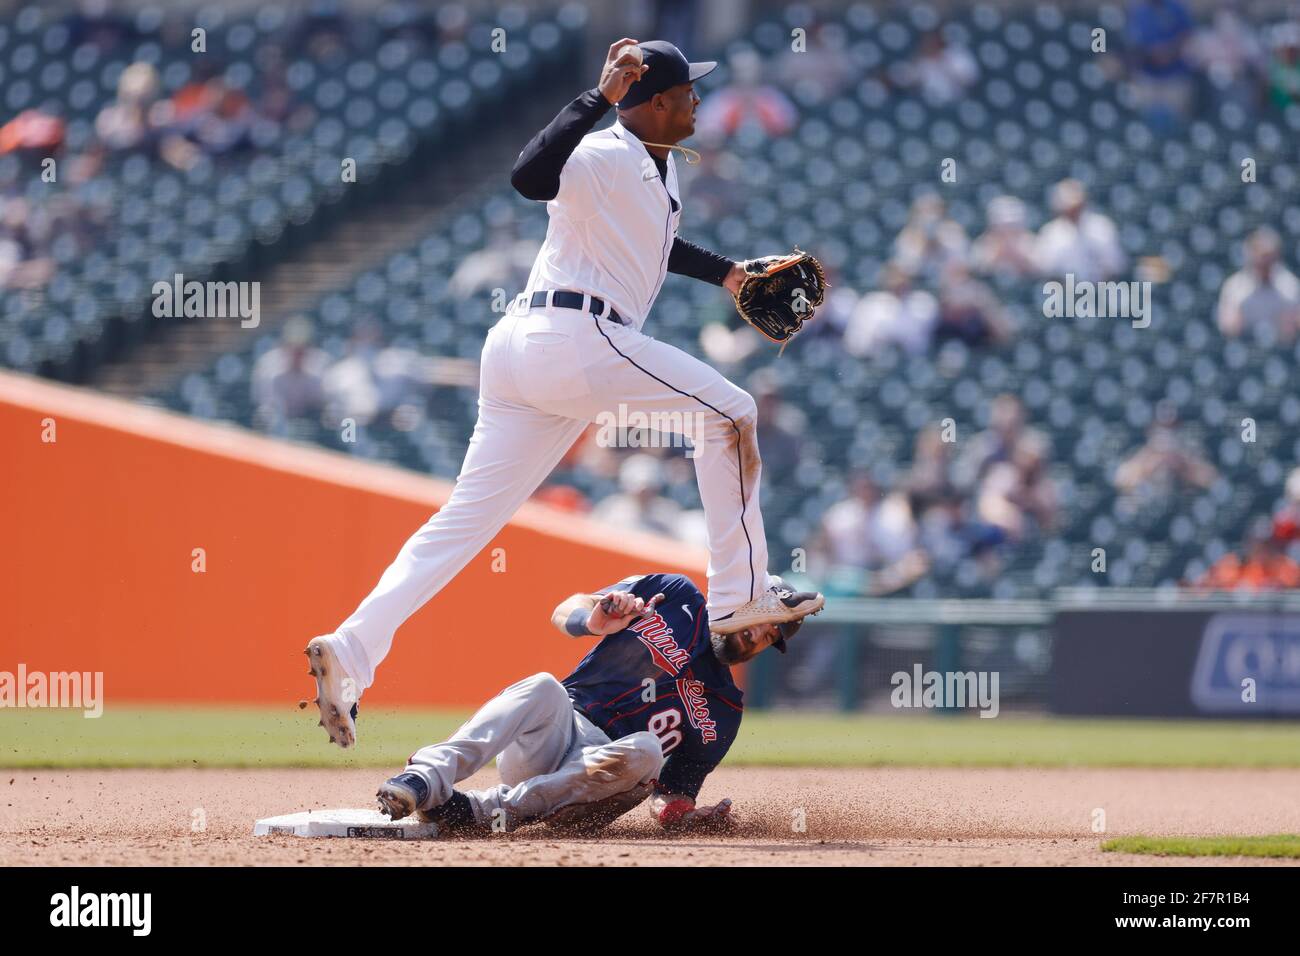 DETROIT, MI - APRIL 6: Jonathan Schoop (7) of the Detroit Tigers jumps over Jake Cave (60) of the Minnesota Twins to turn a double play at Comerica Pa Stock Photo